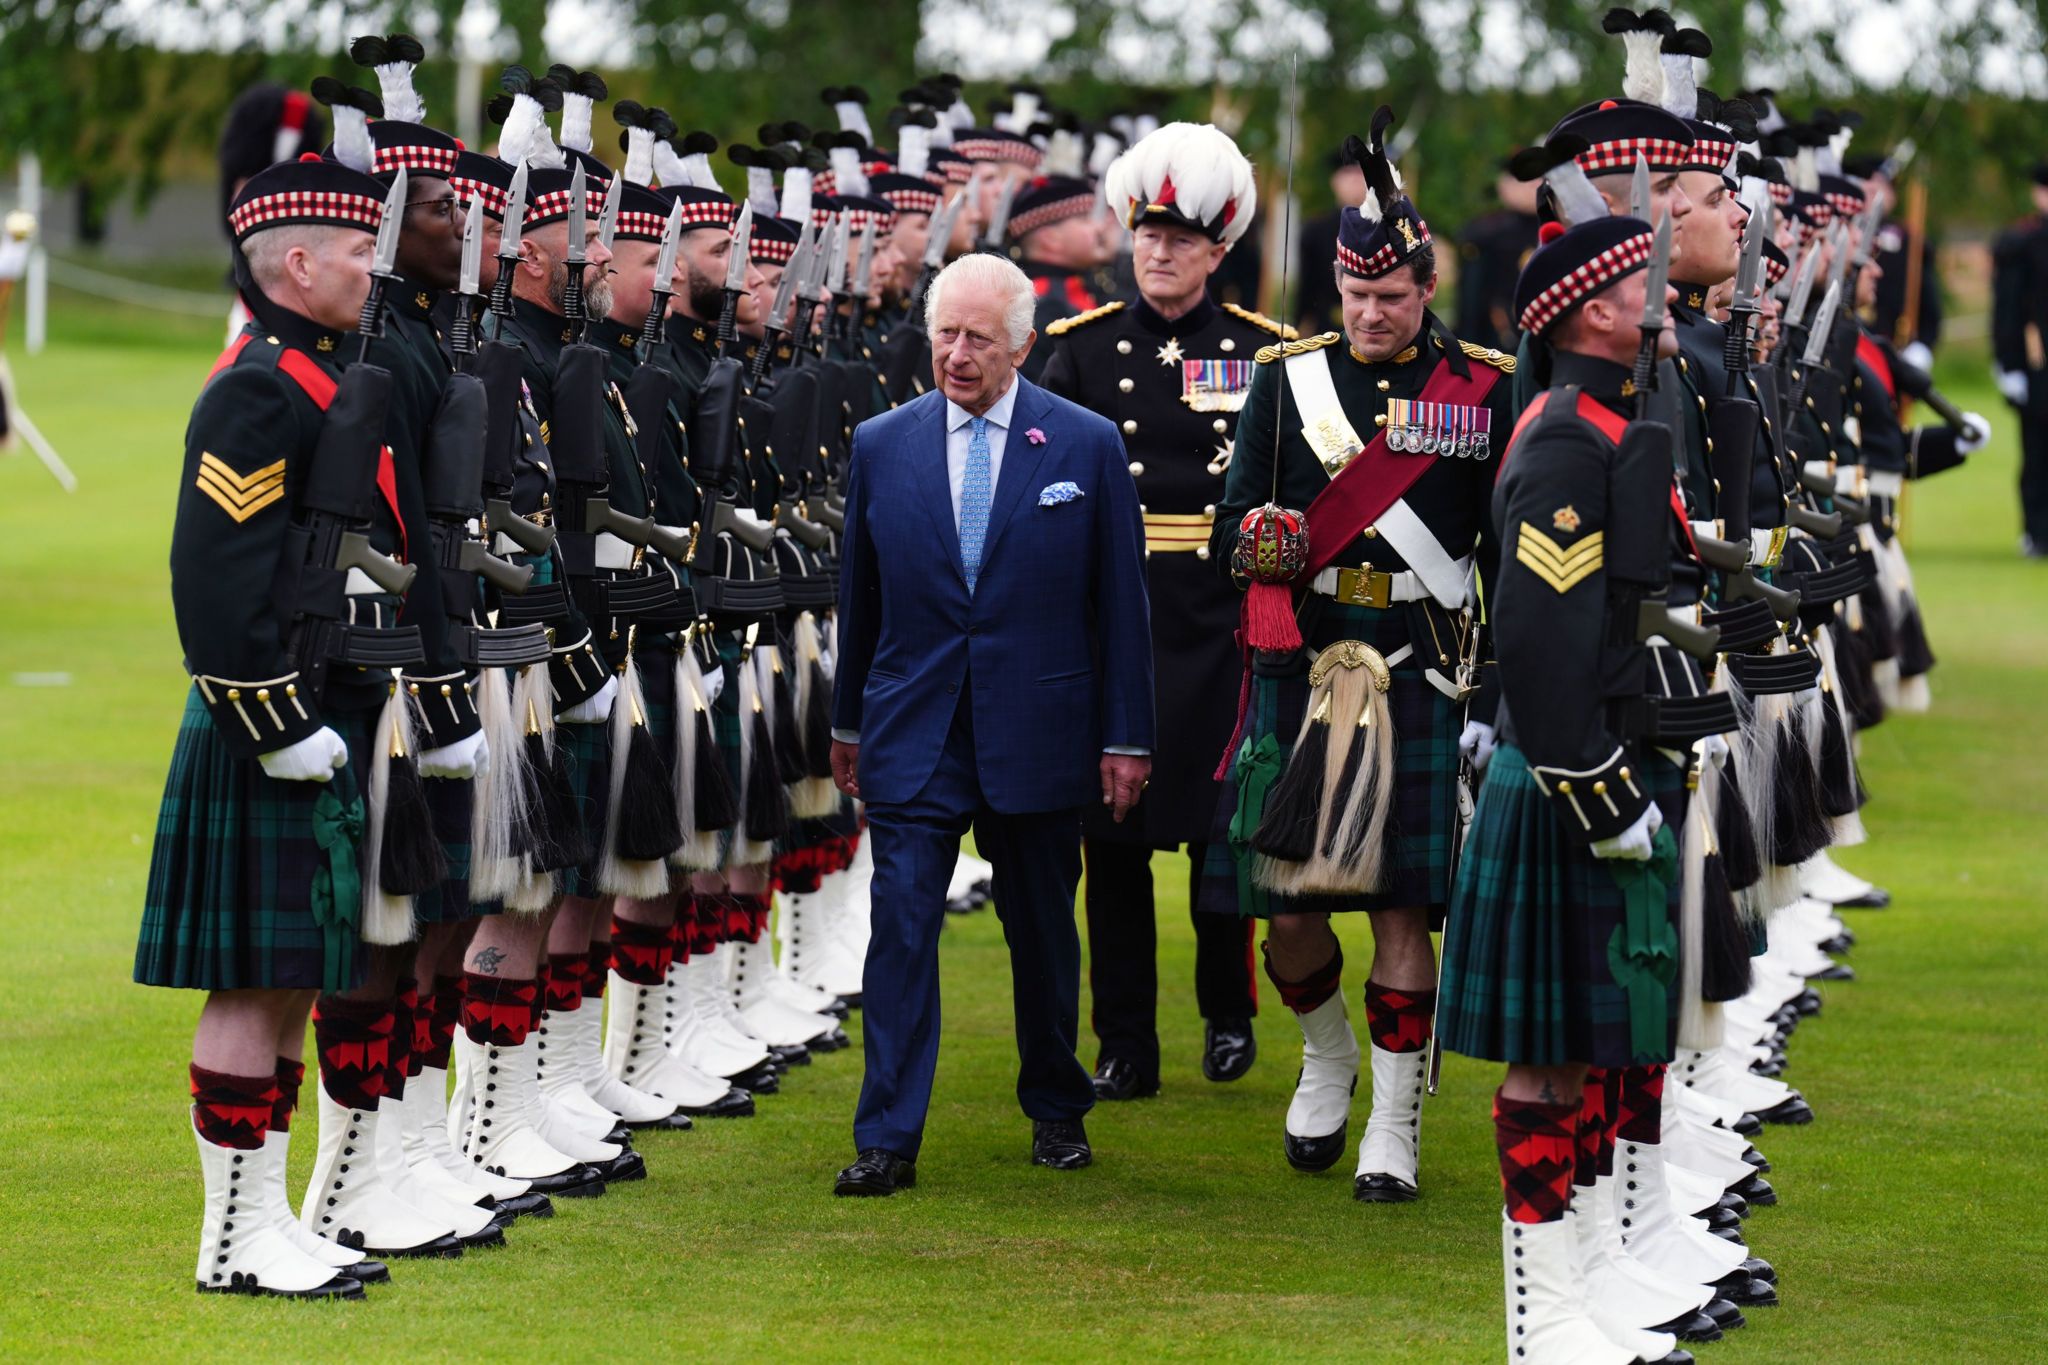 The King inspects a guard of honour in the Palace of Holyroodhouse garden